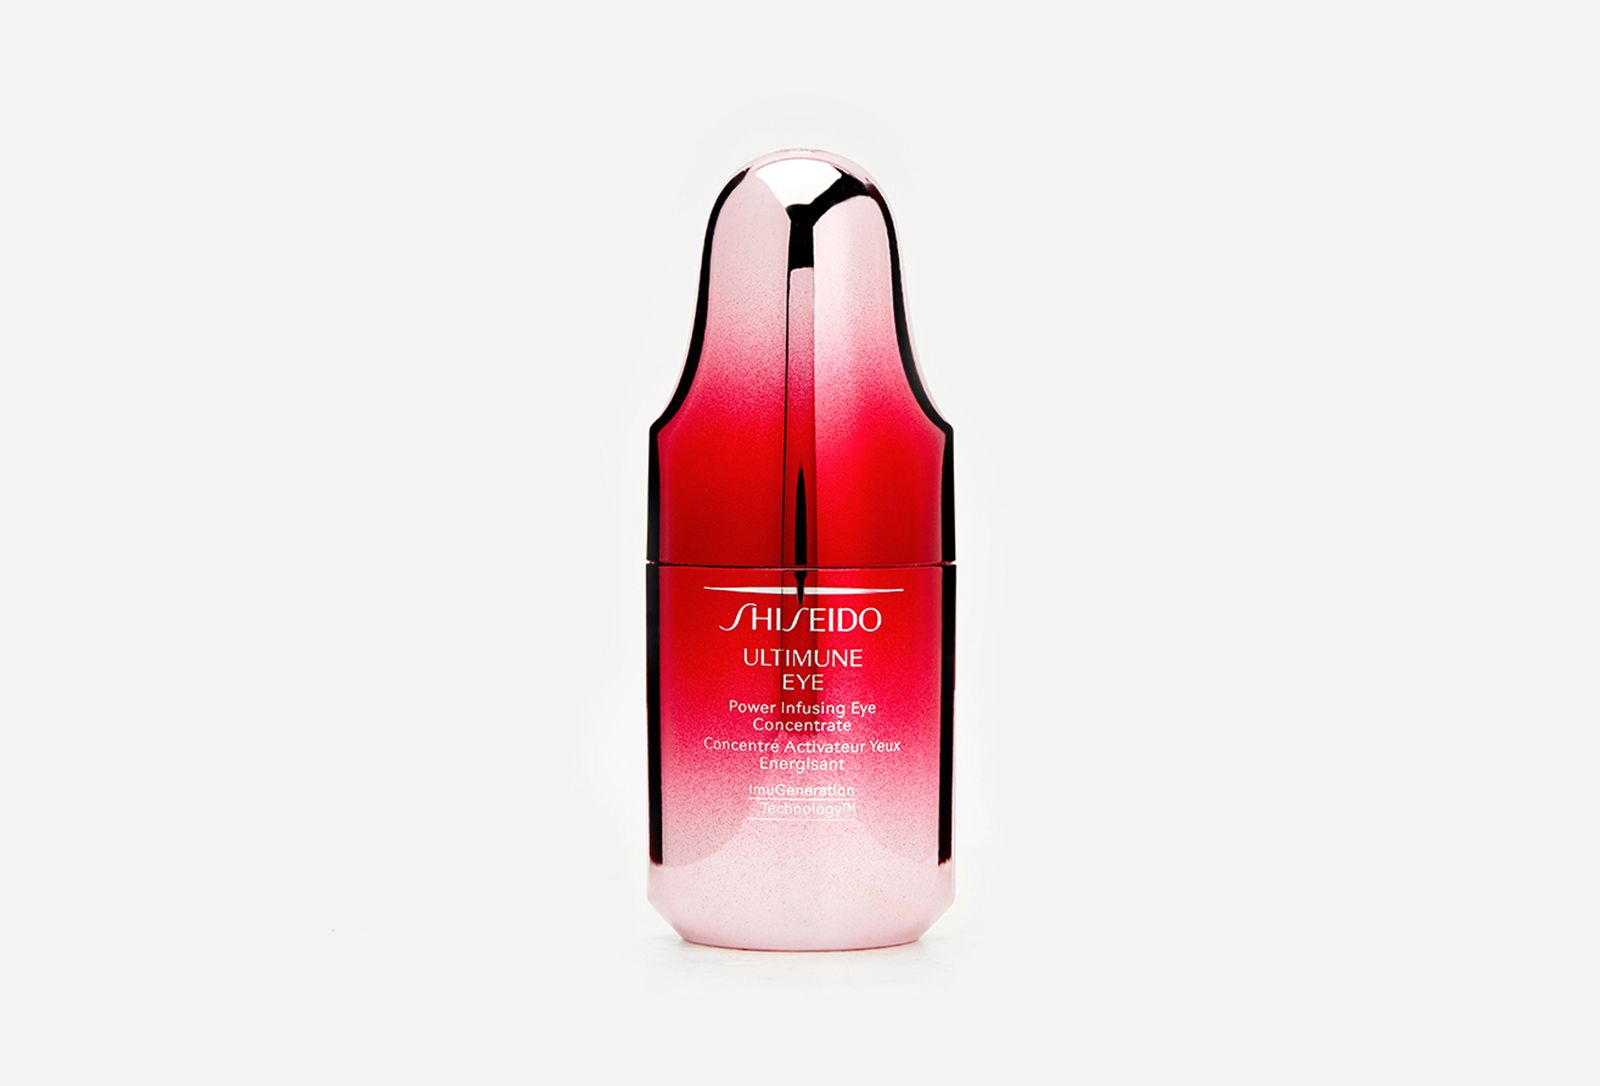 Shiseido concentrate. Ultimune концентрат шисейдо Power infusing. Концентрат Shiseido Ultimune Power infusing Concentrate. Shiseido Ultimate Power infusing. Shiseido Ultimate Serum.